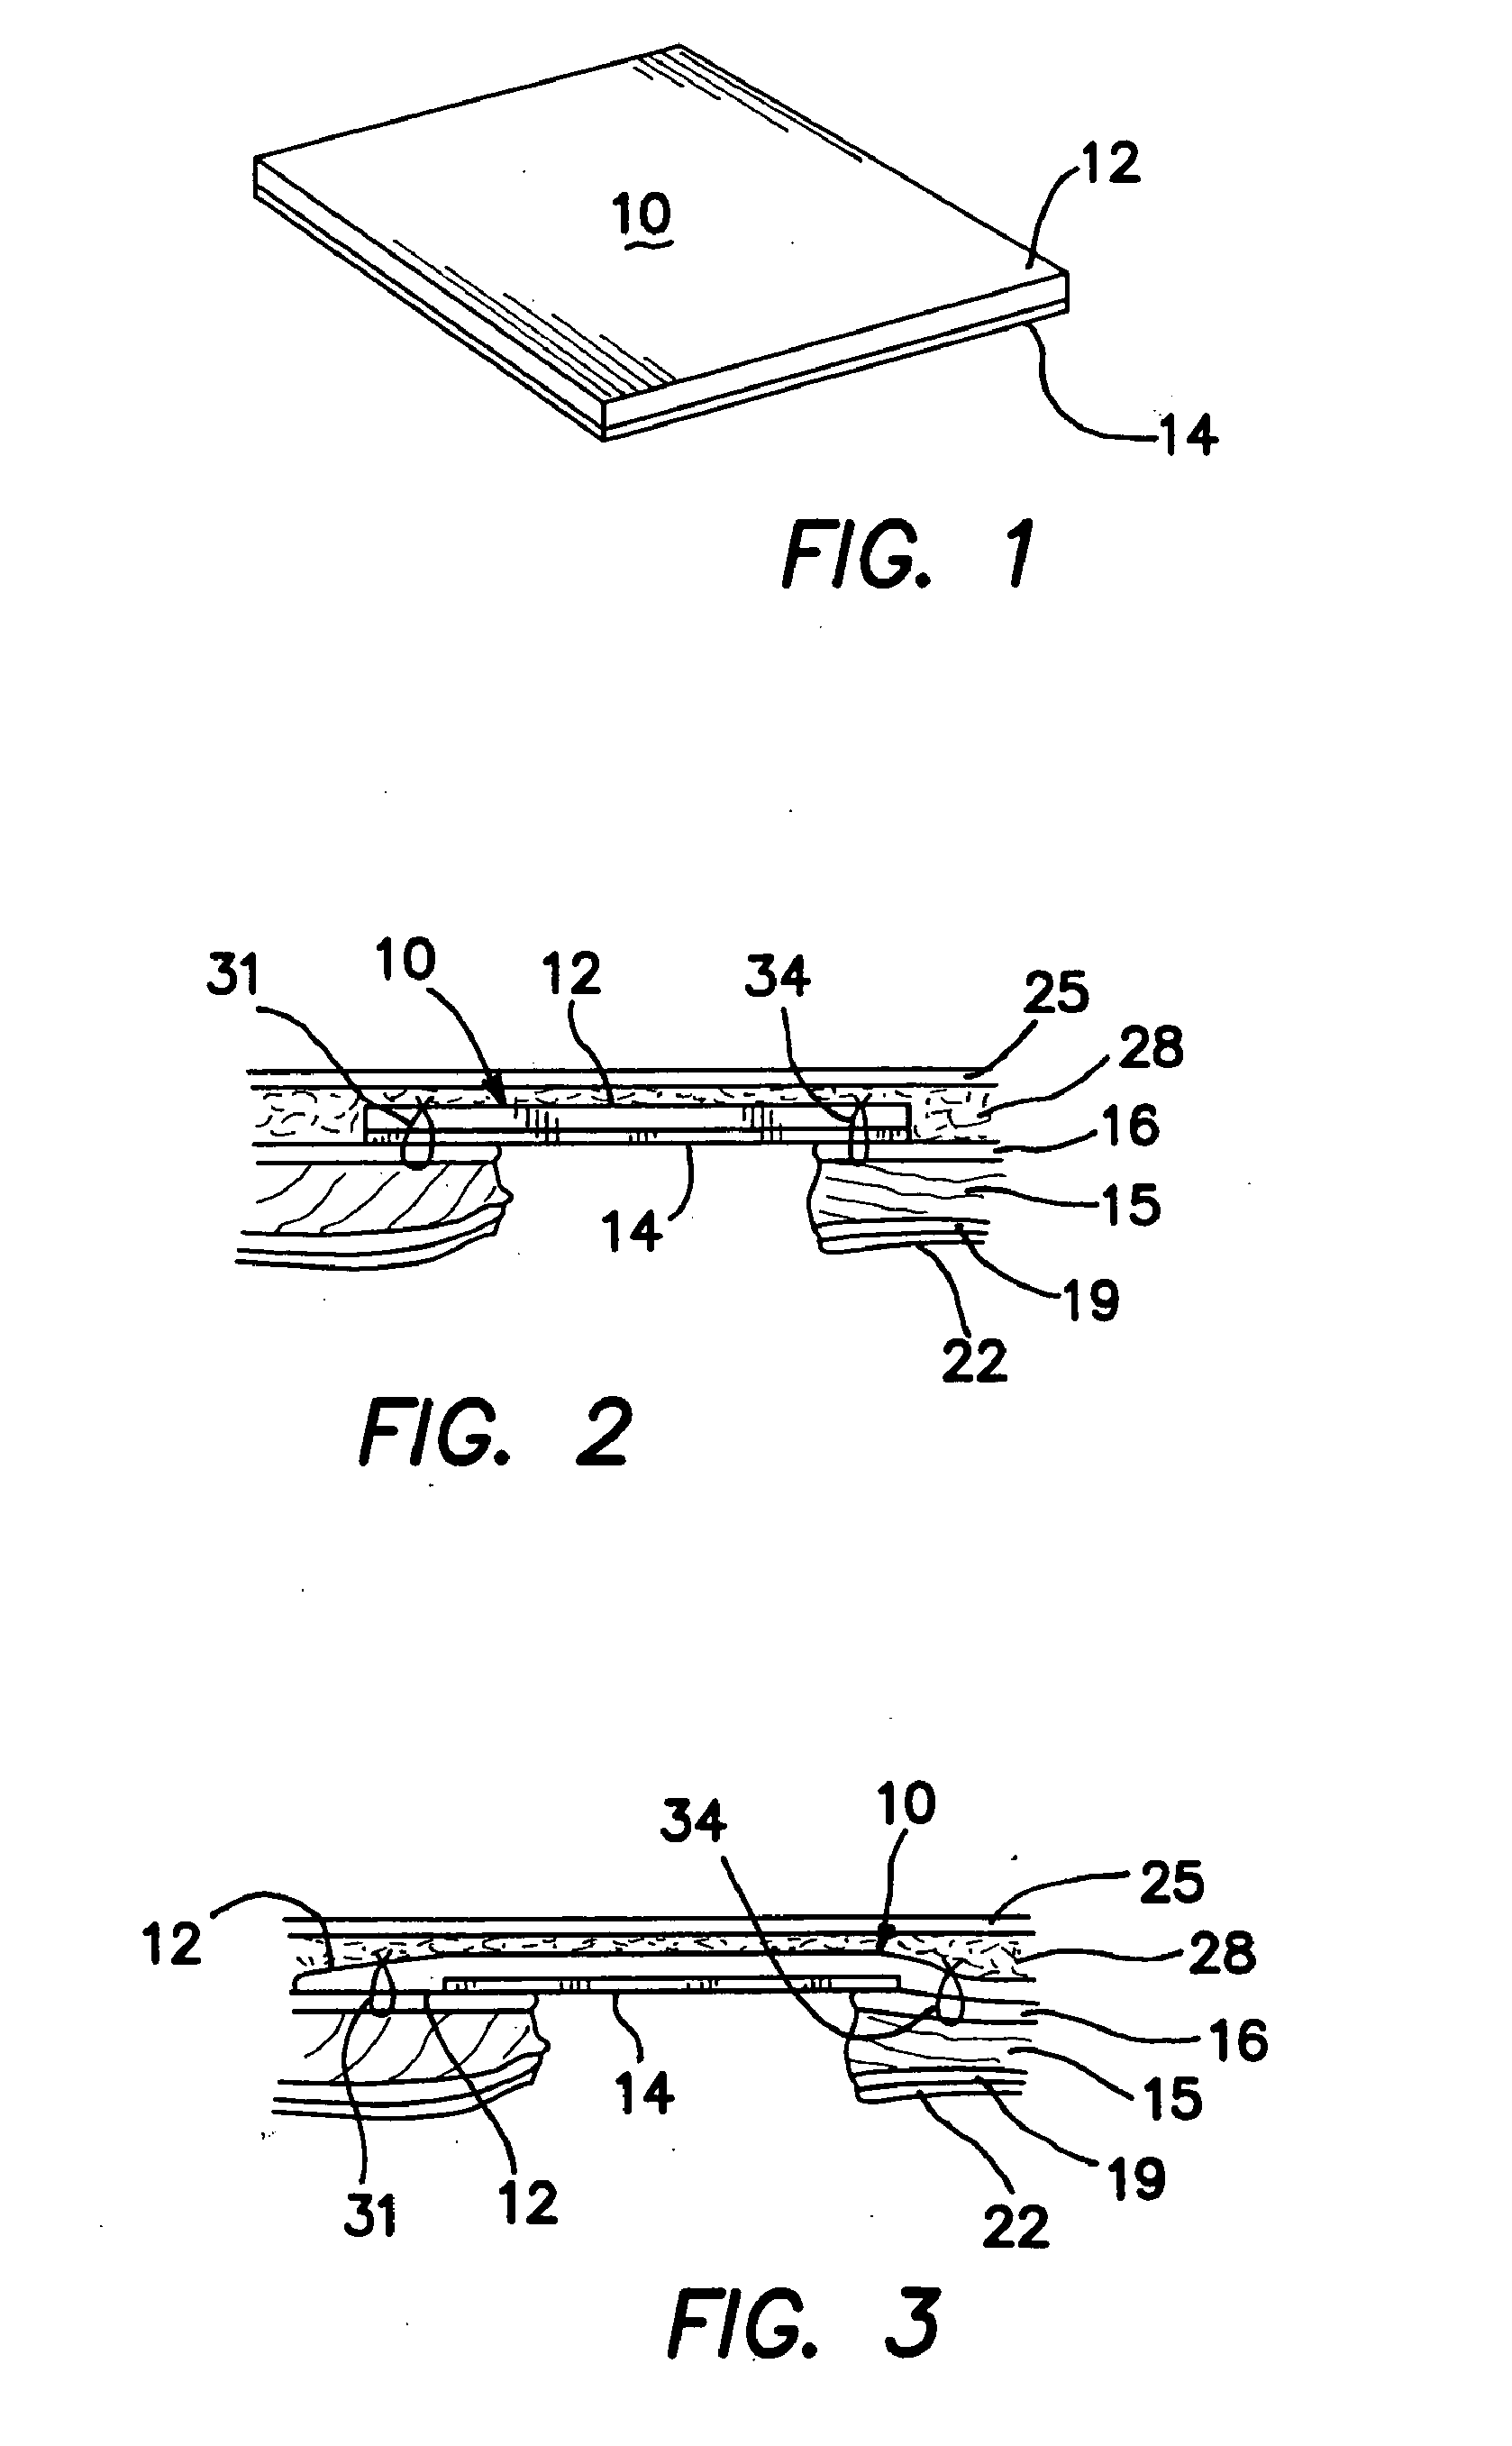 Tissue-treating implantable compositions